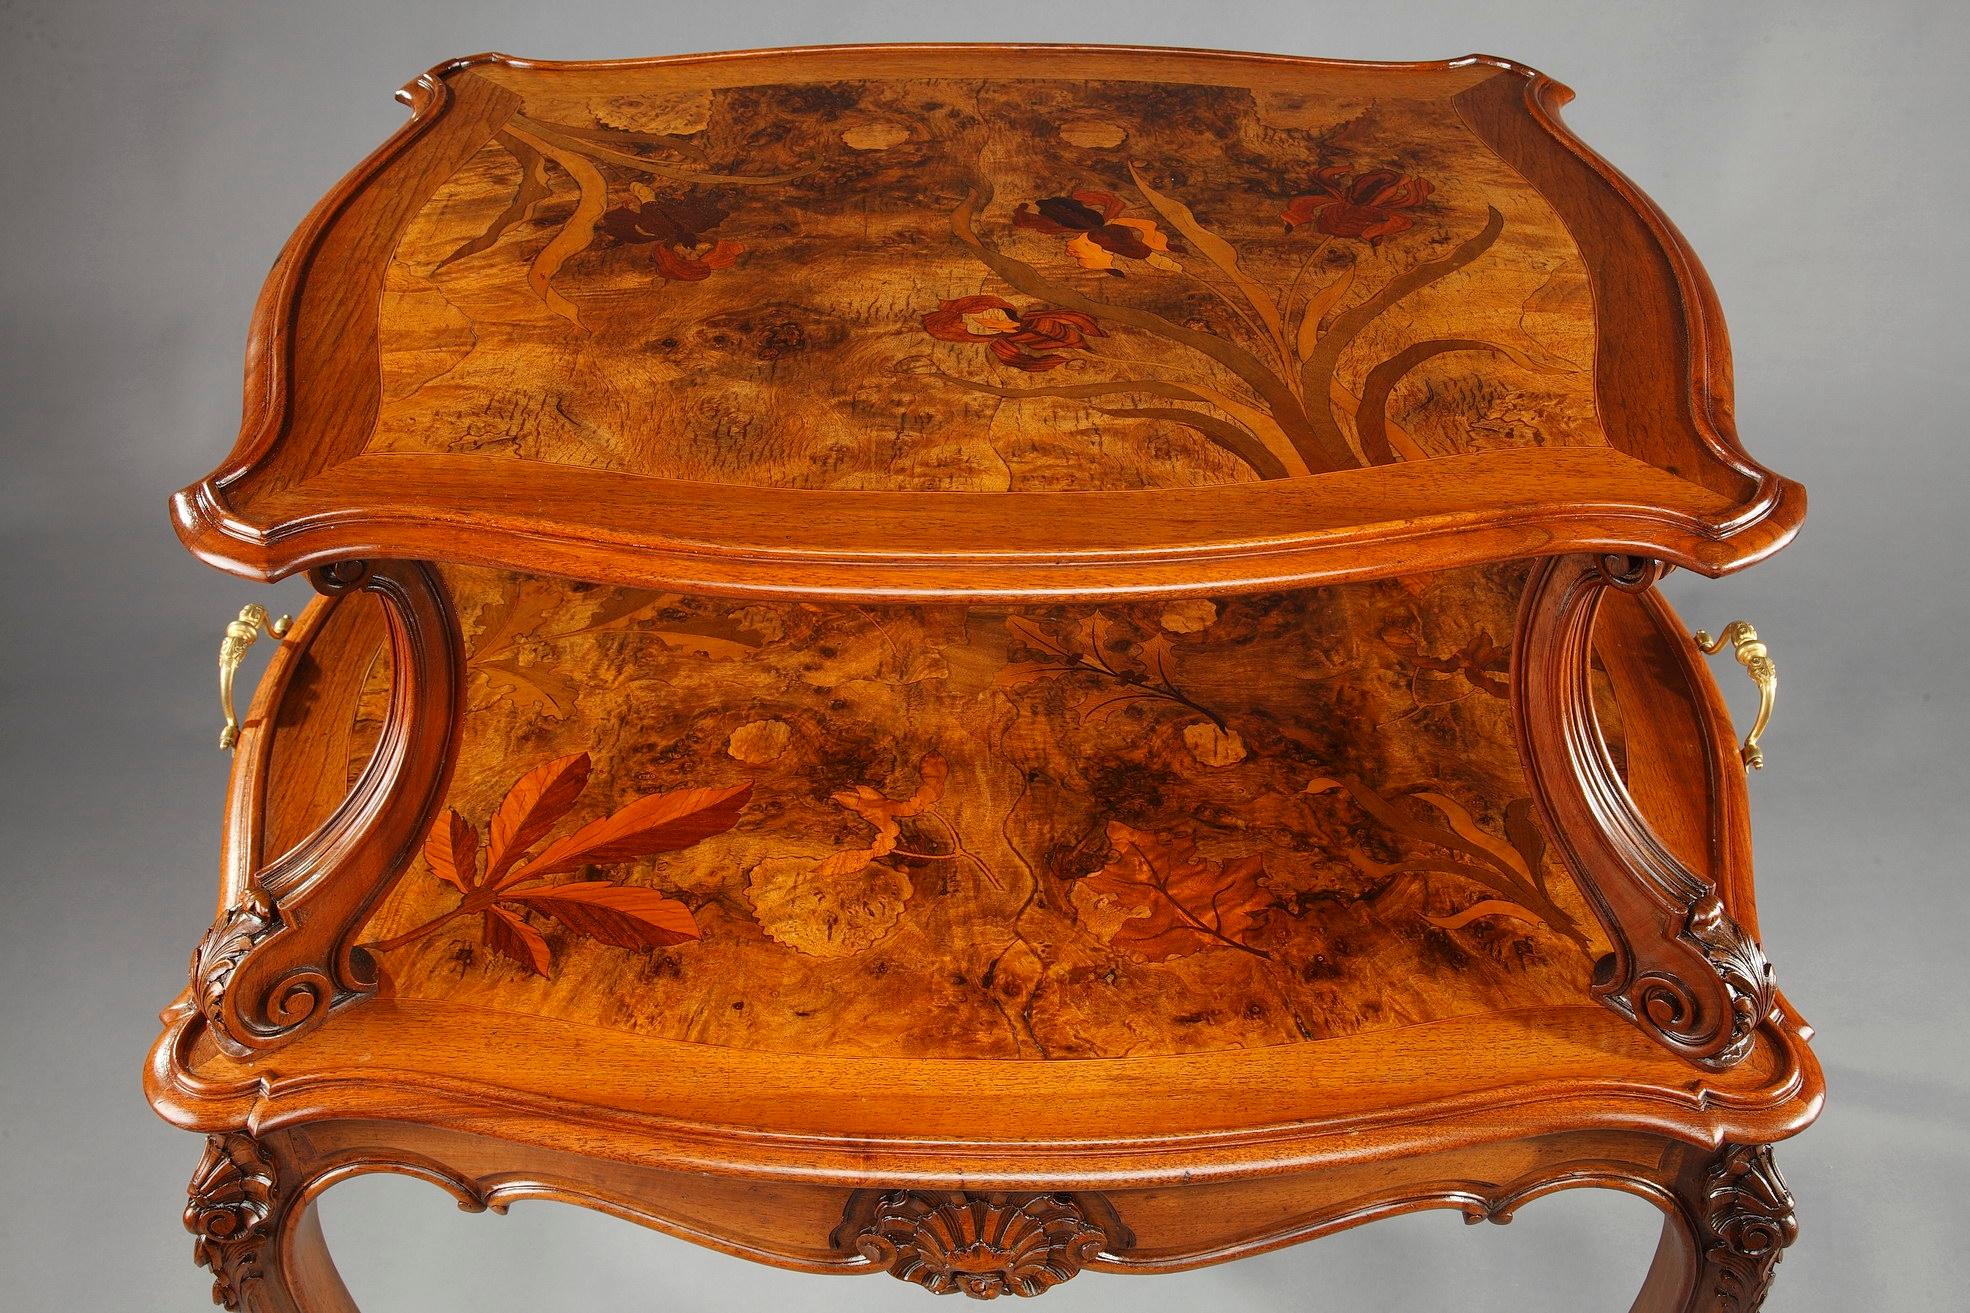 European Wooden Tea Table with Polychrome Marquetry Decoration, Art Nouveau Period